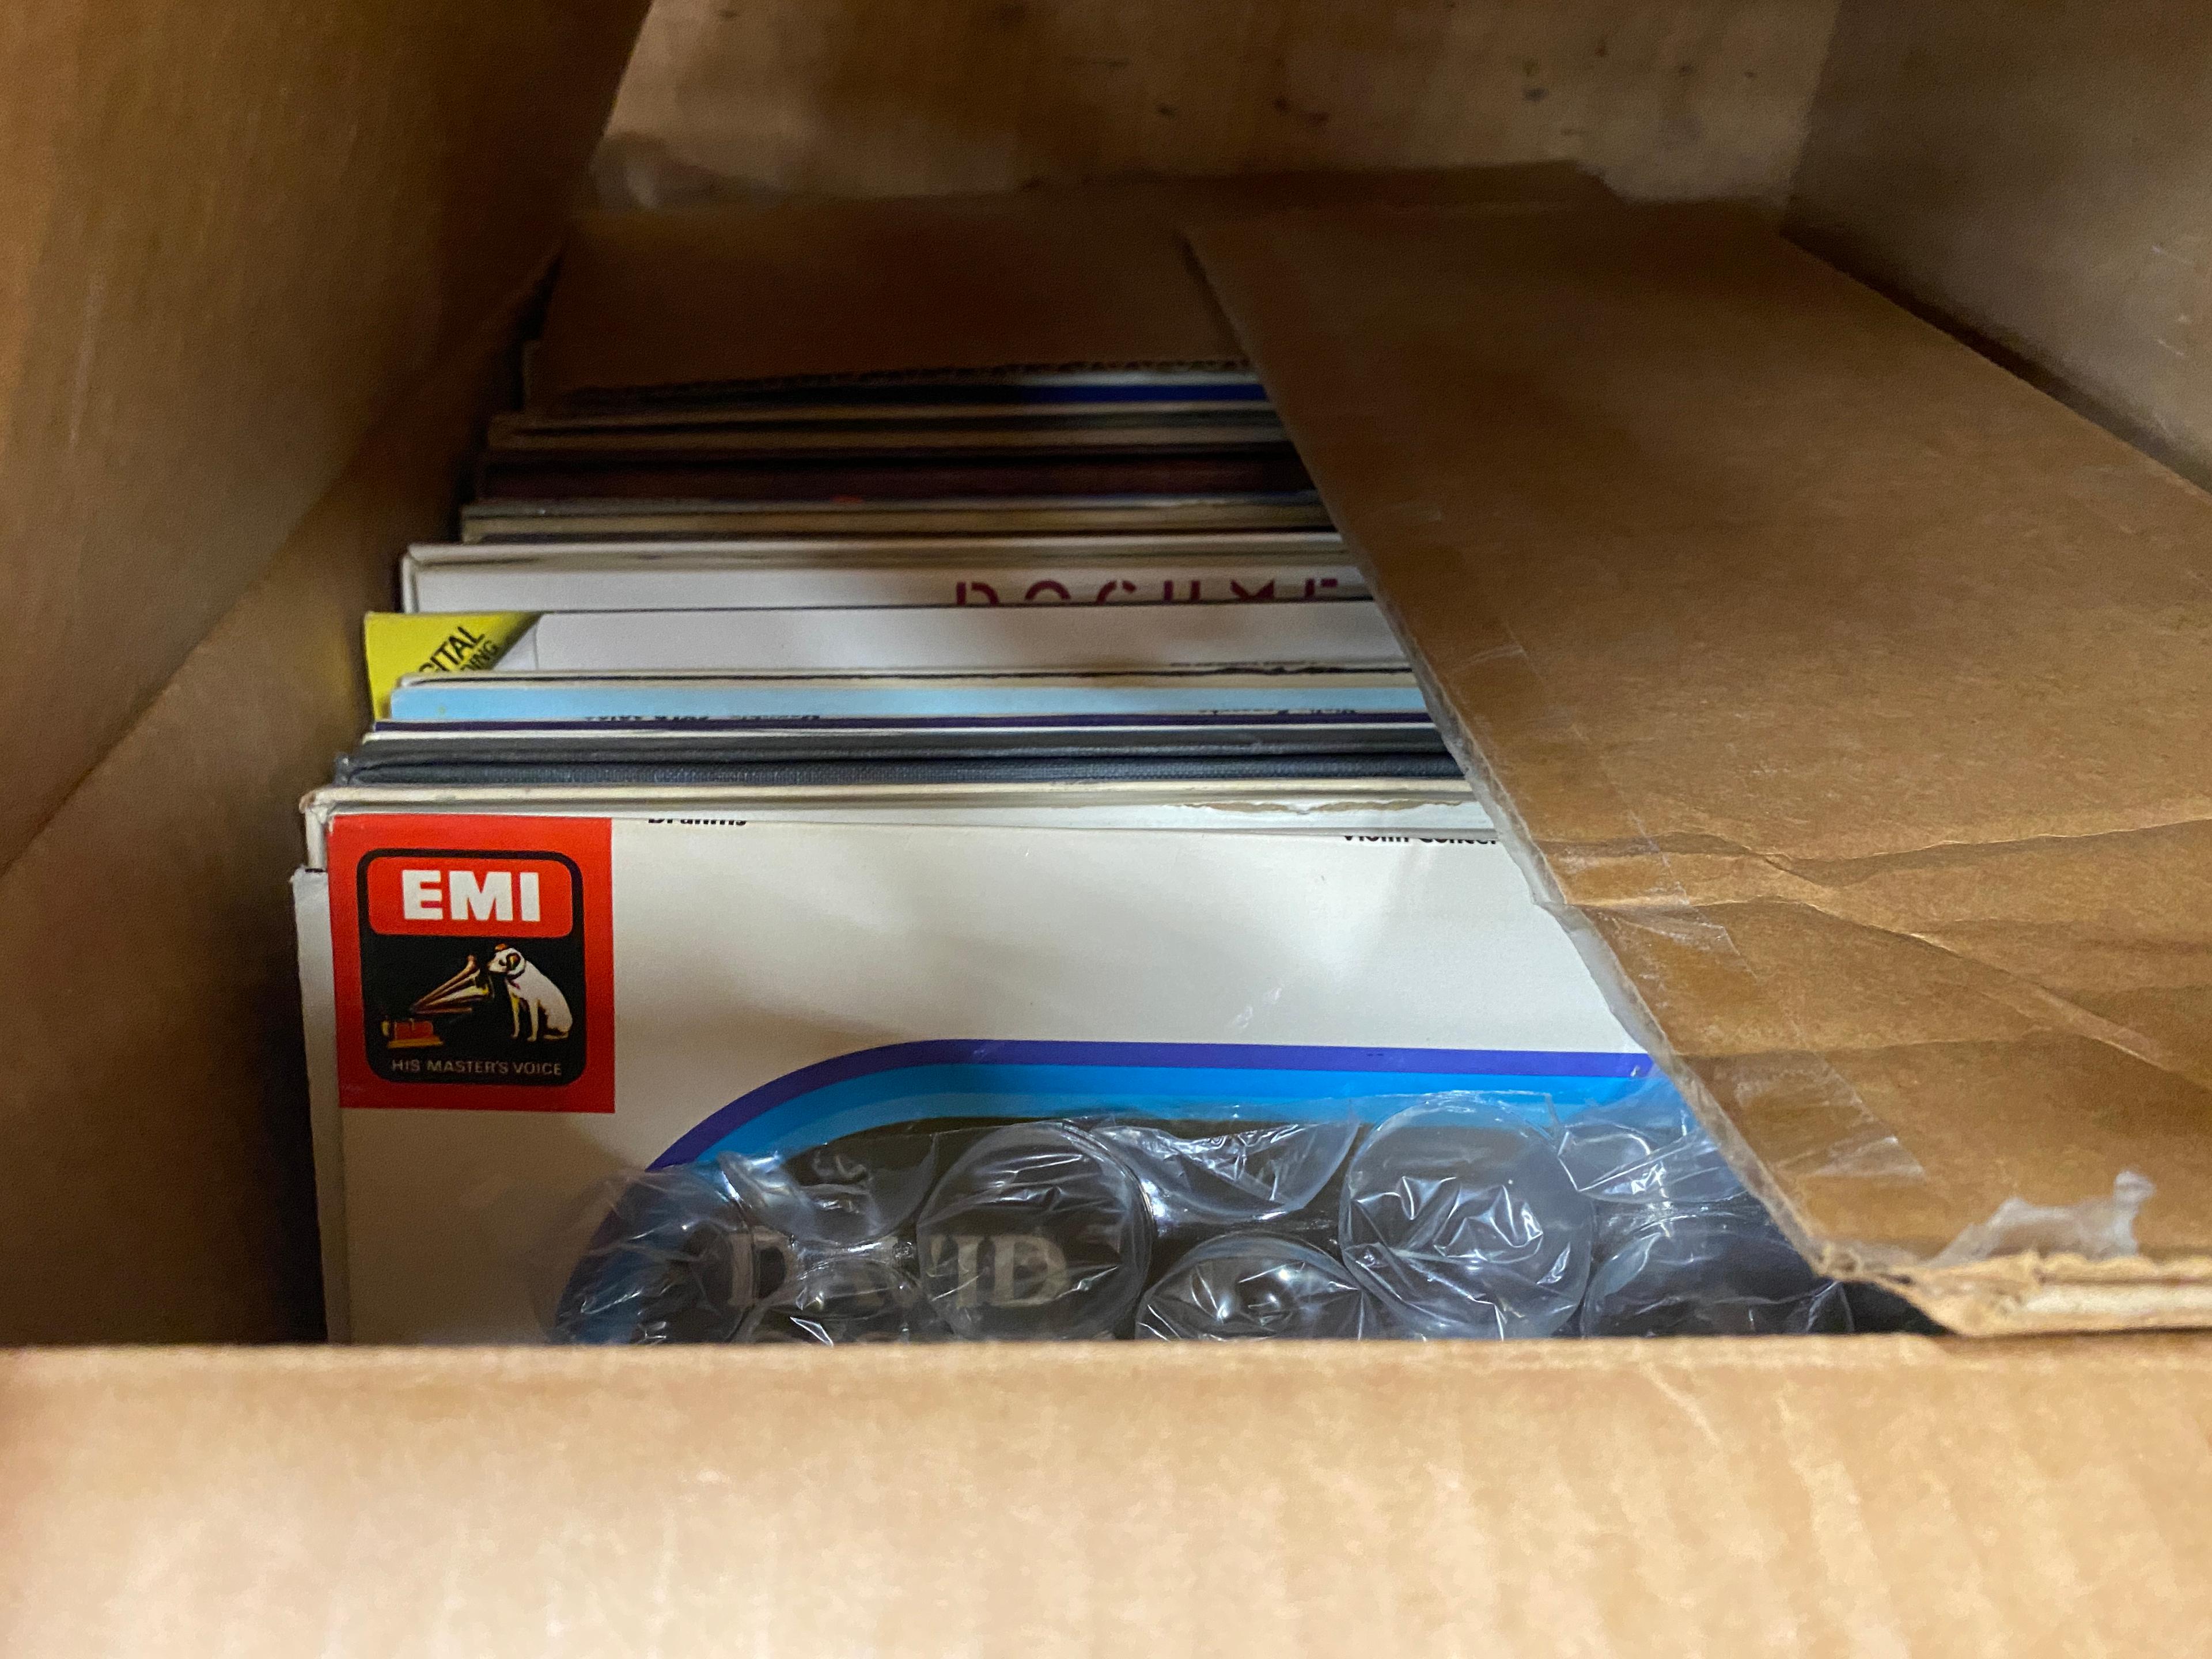 Music: Classical Vinyl Records, 40 Boxes, 1500 Albums Estimated, on 5 Carts